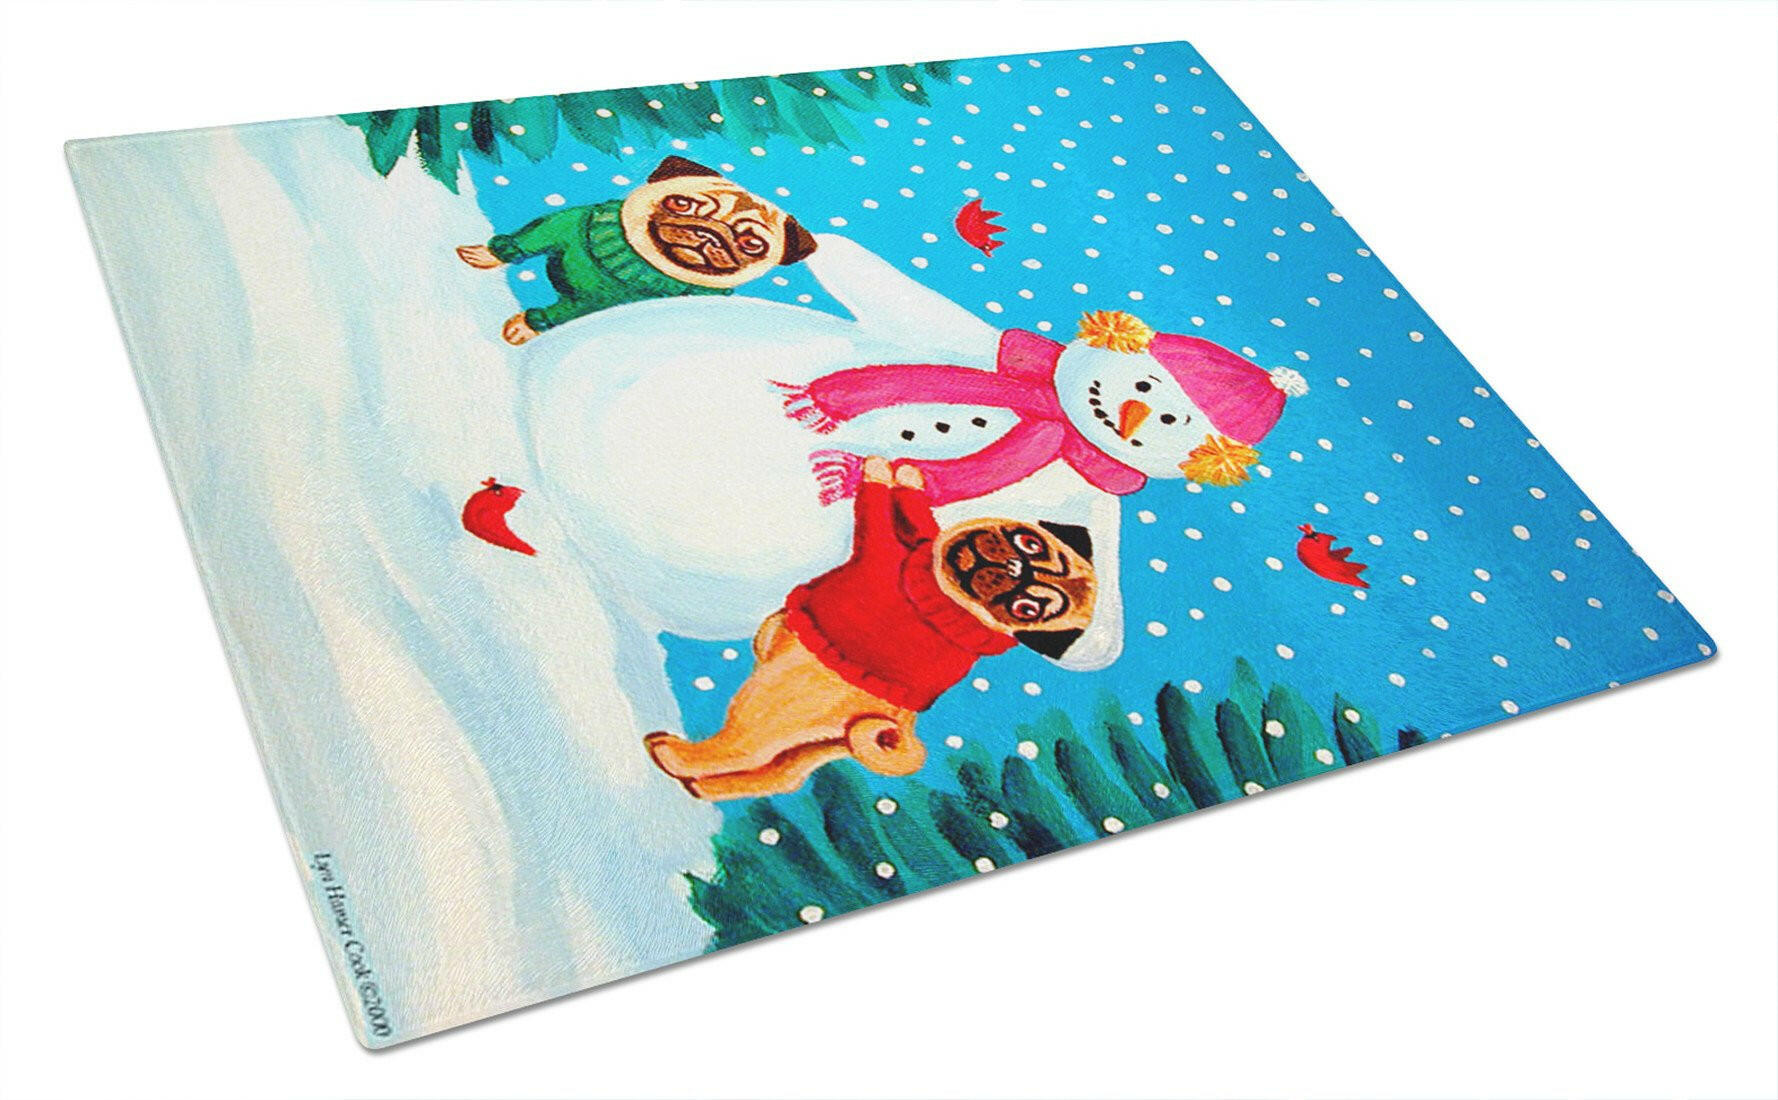 Snowman with Pug Glass Cutting Board Large by Caroline's Treasures